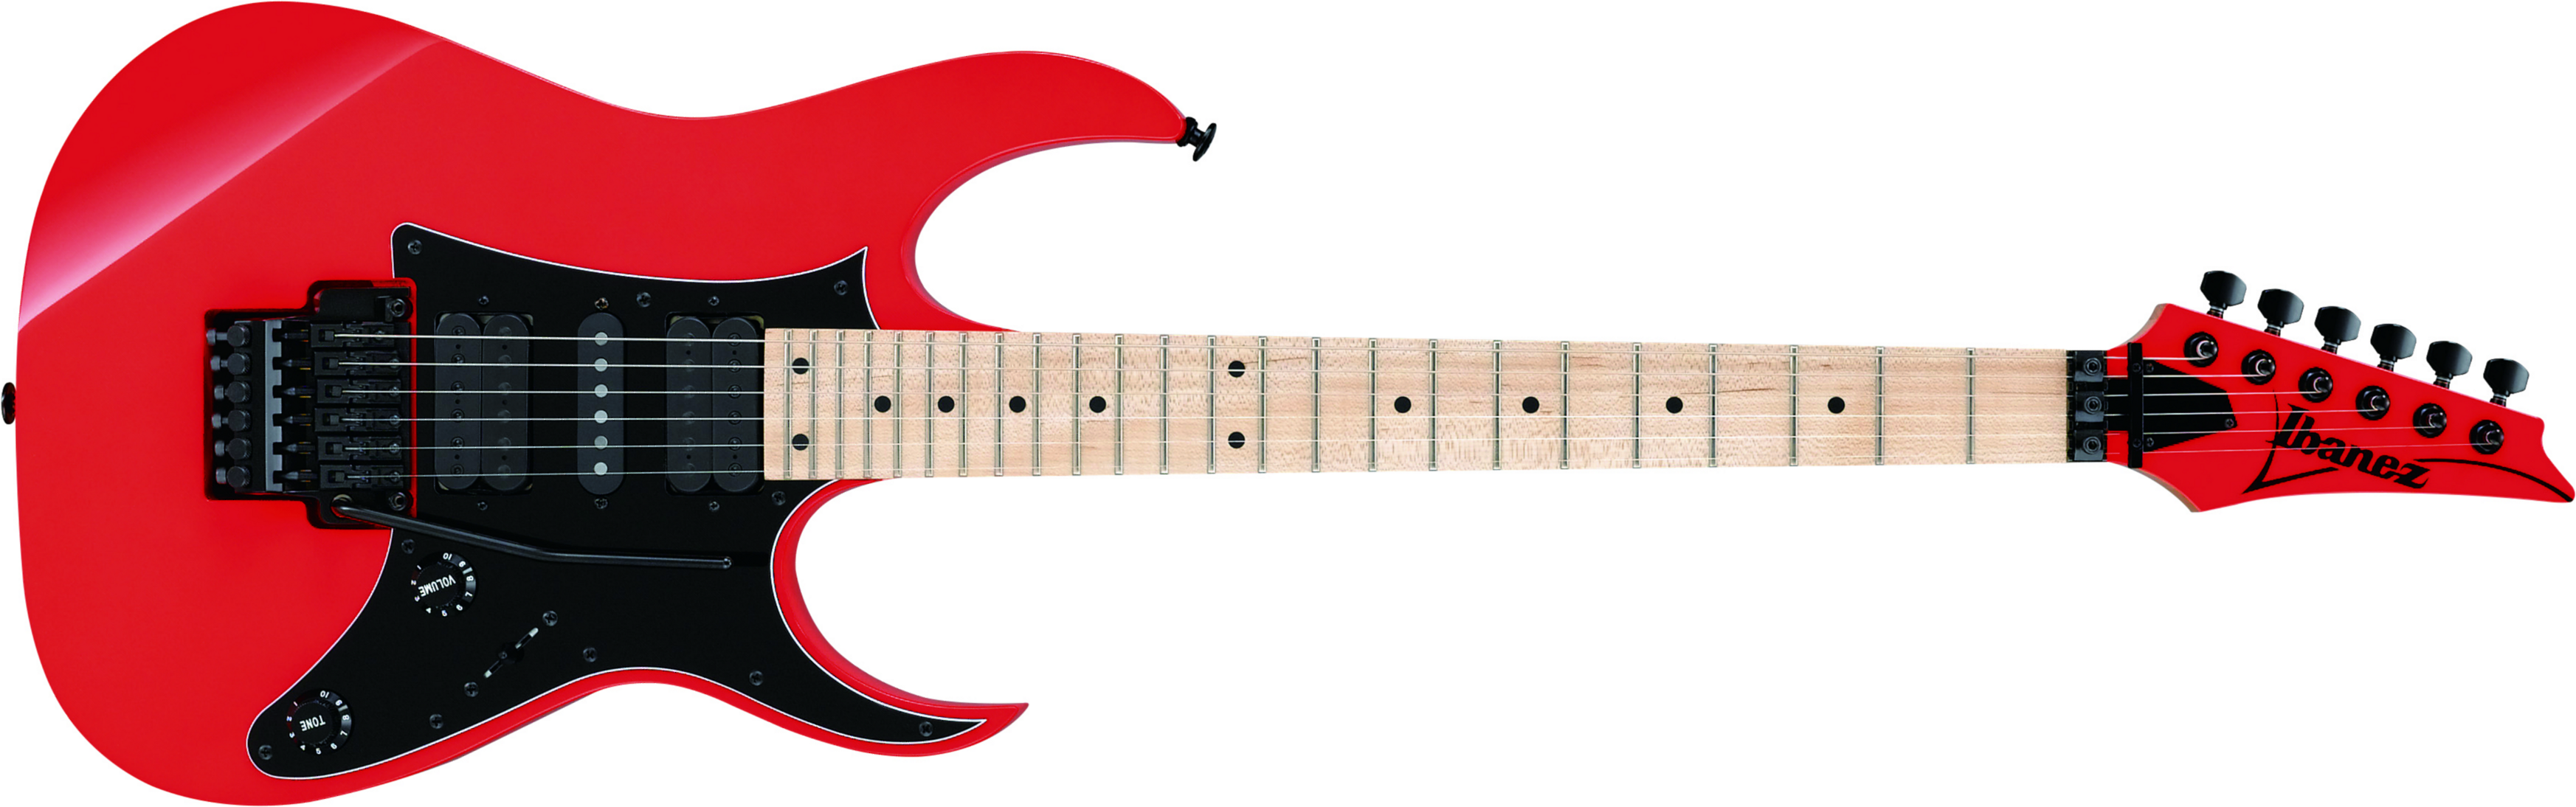 Ibanez Rg550 Rf Genesis Japon Hsh Fr Mn - Road Flare Red - E-Gitarre in Str-Form - Main picture